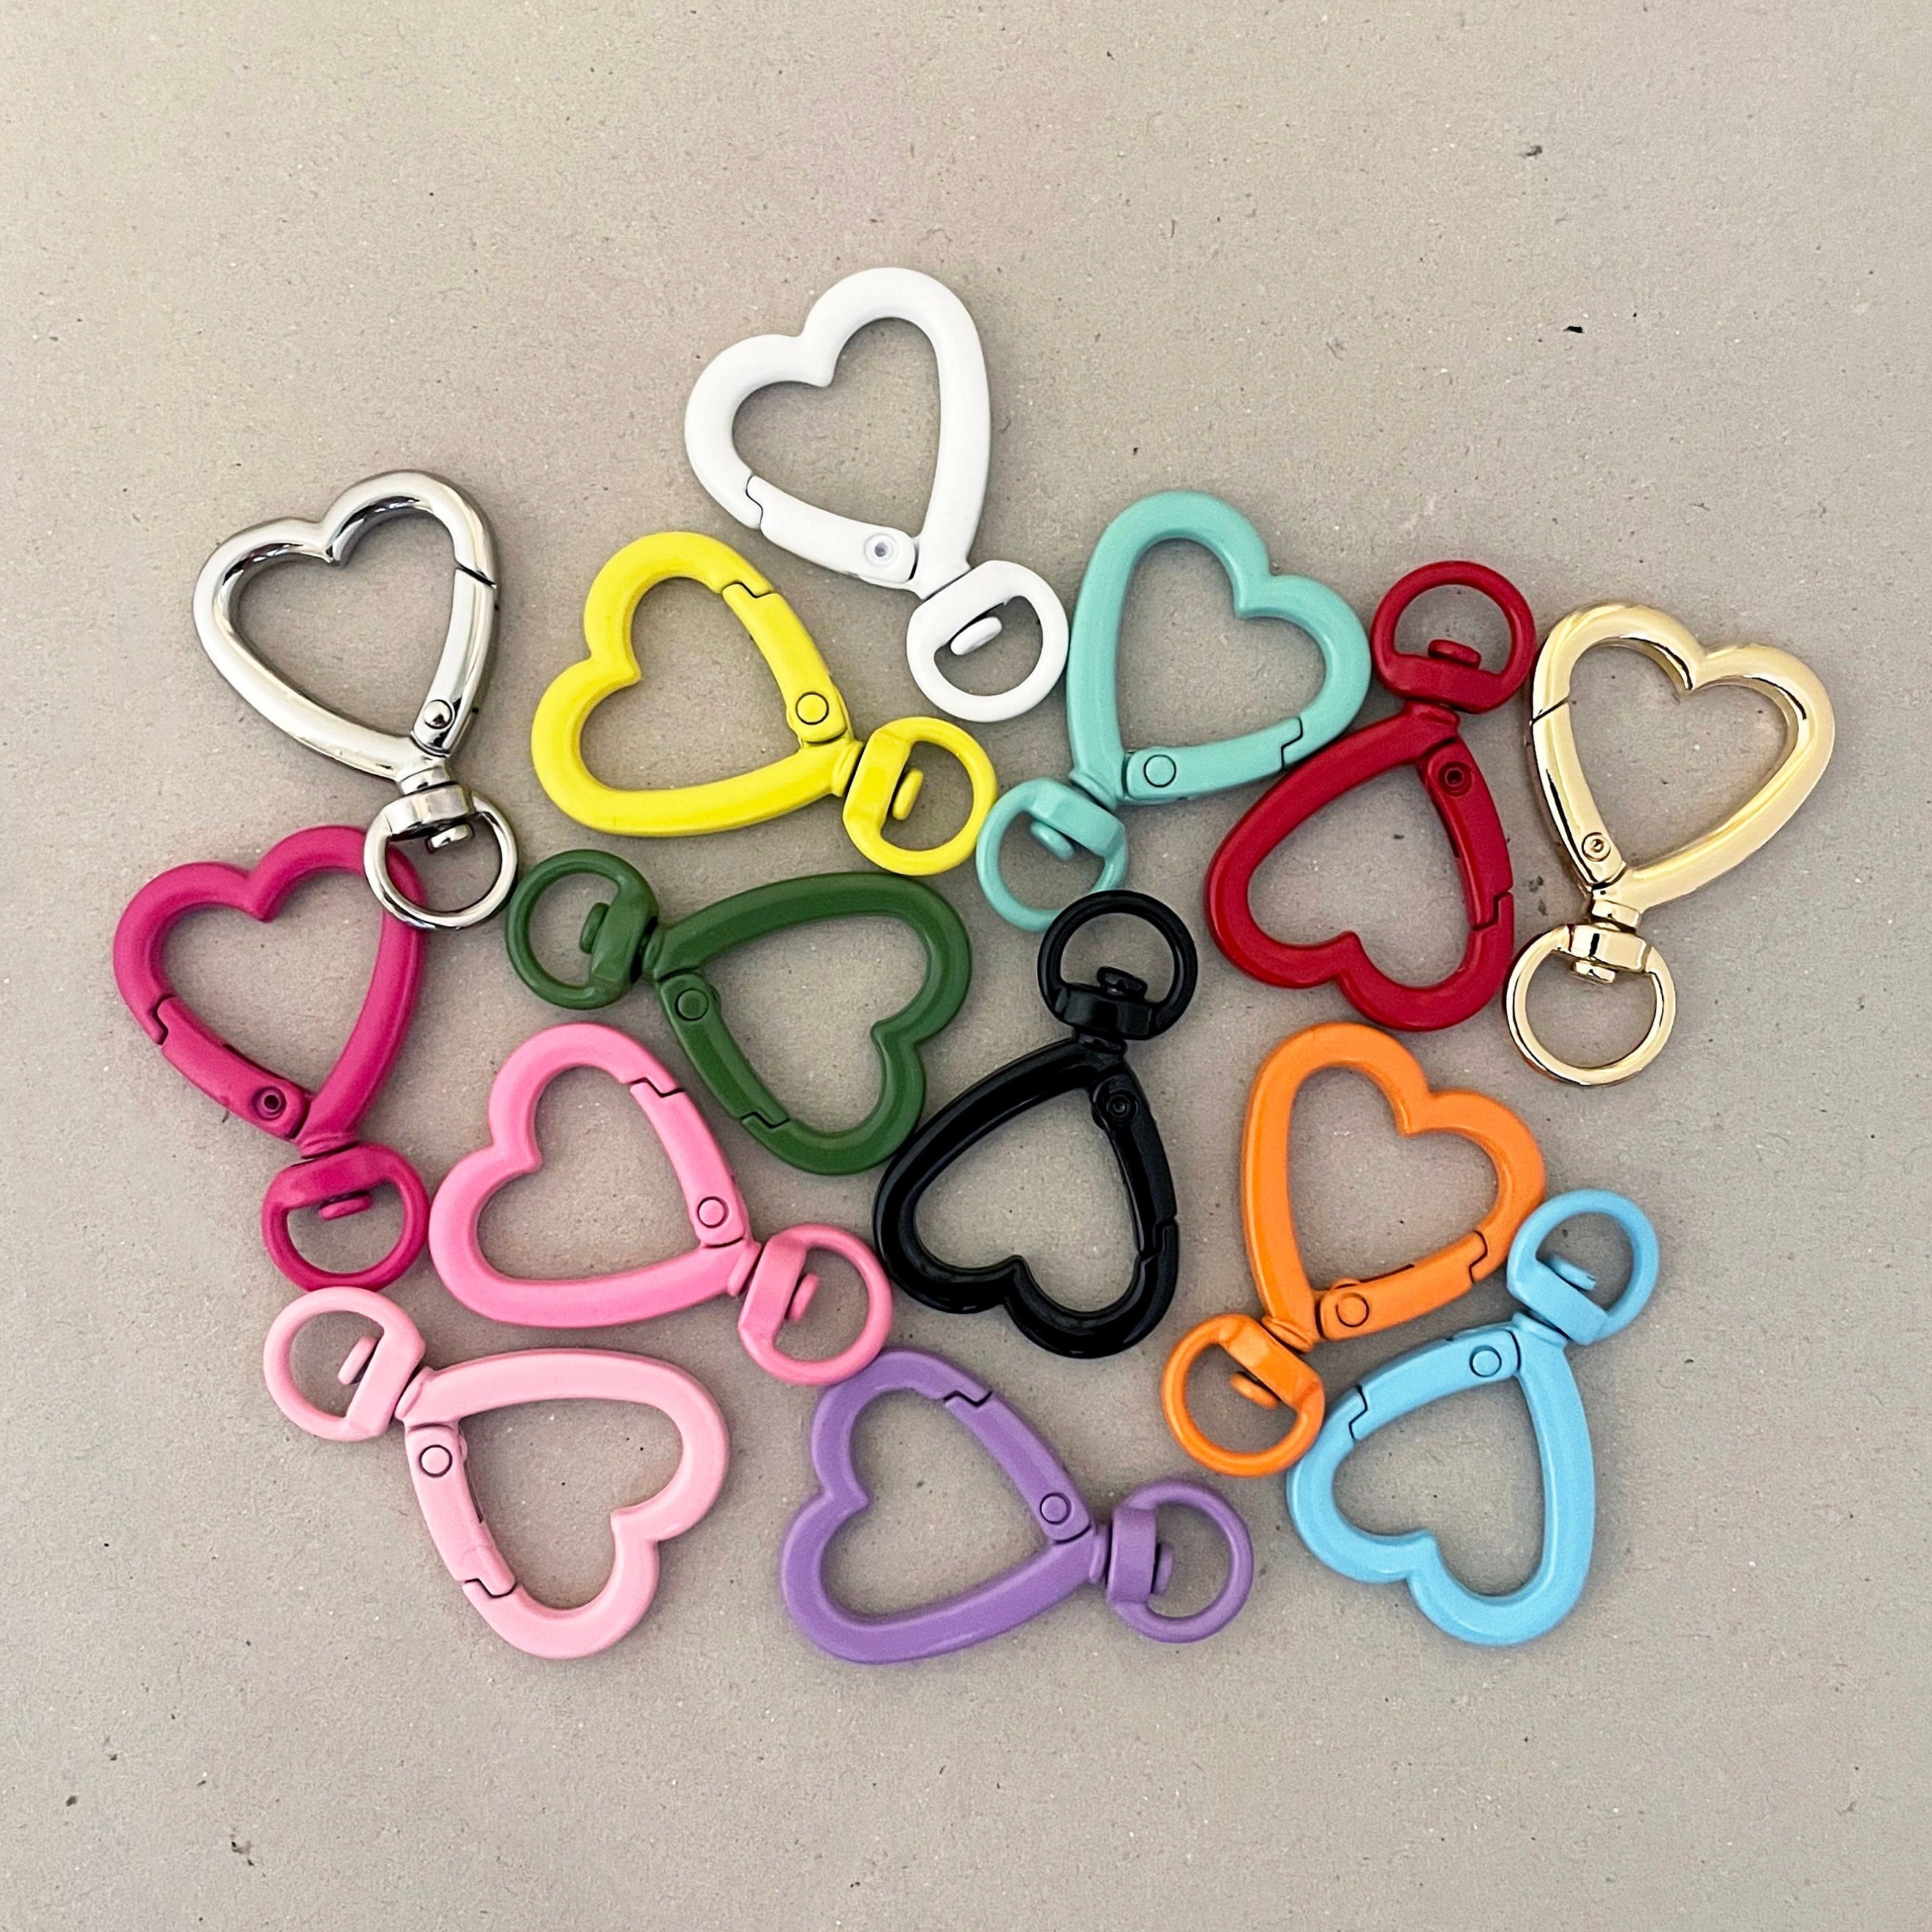 5Pcs/lot Peach Heart Shape Metal Spring Clasp Hooks Carabiner Key Ring  Connectors For DIY Keychain Jewelry Making Accessories